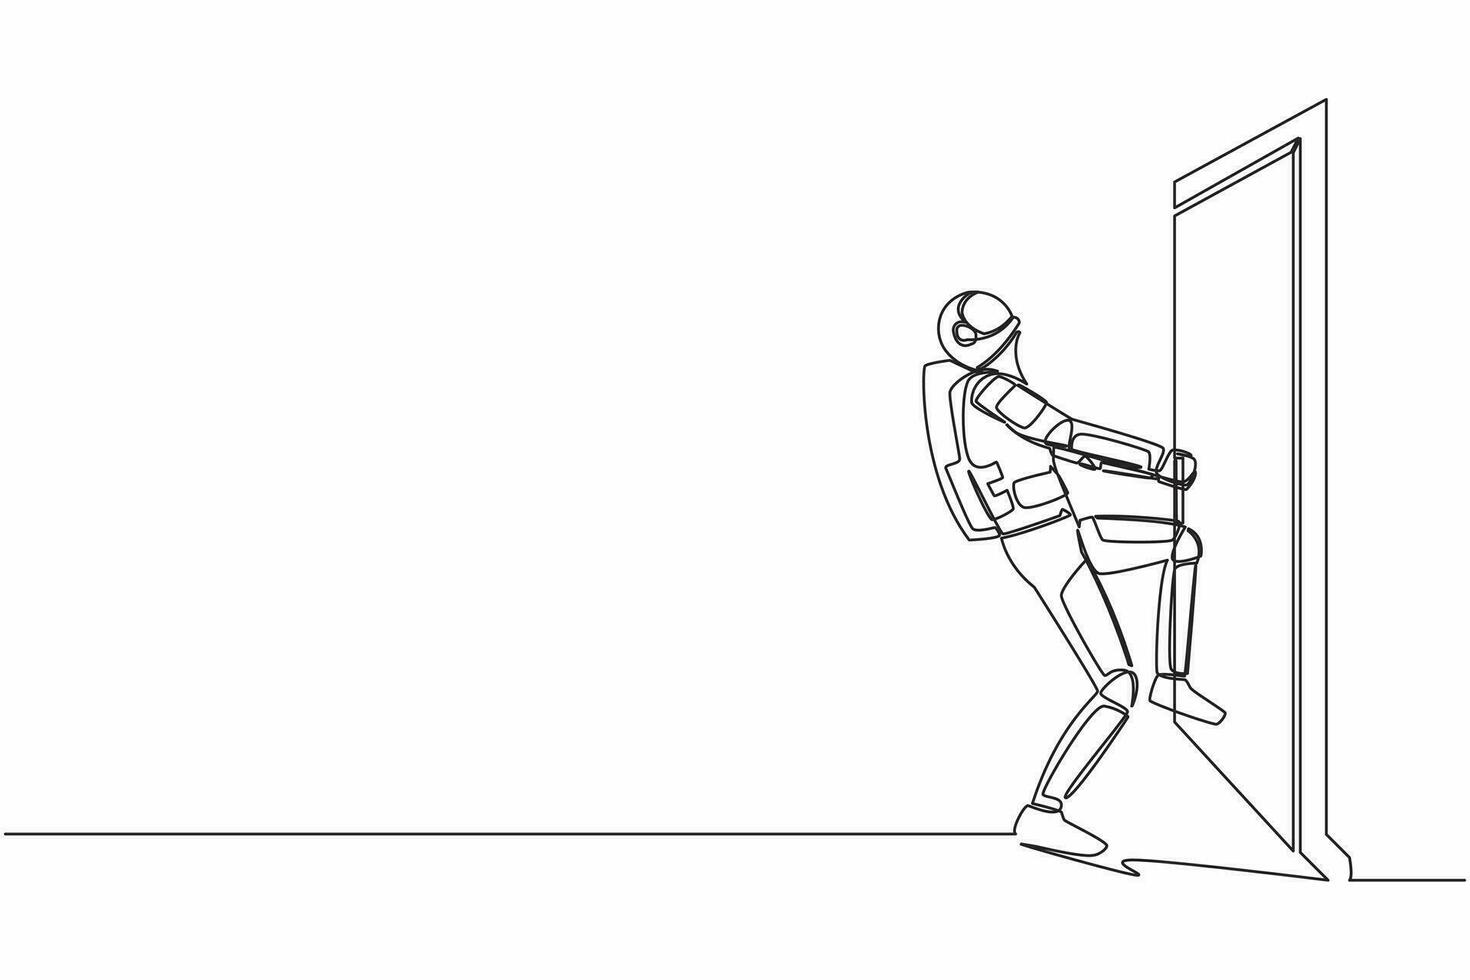 Single one line drawing astronaut pulling closed door knob with power, metaphor to facing problem. Space exploration struggle. Cosmic galaxy space. Continuous line graphic design vector illustration